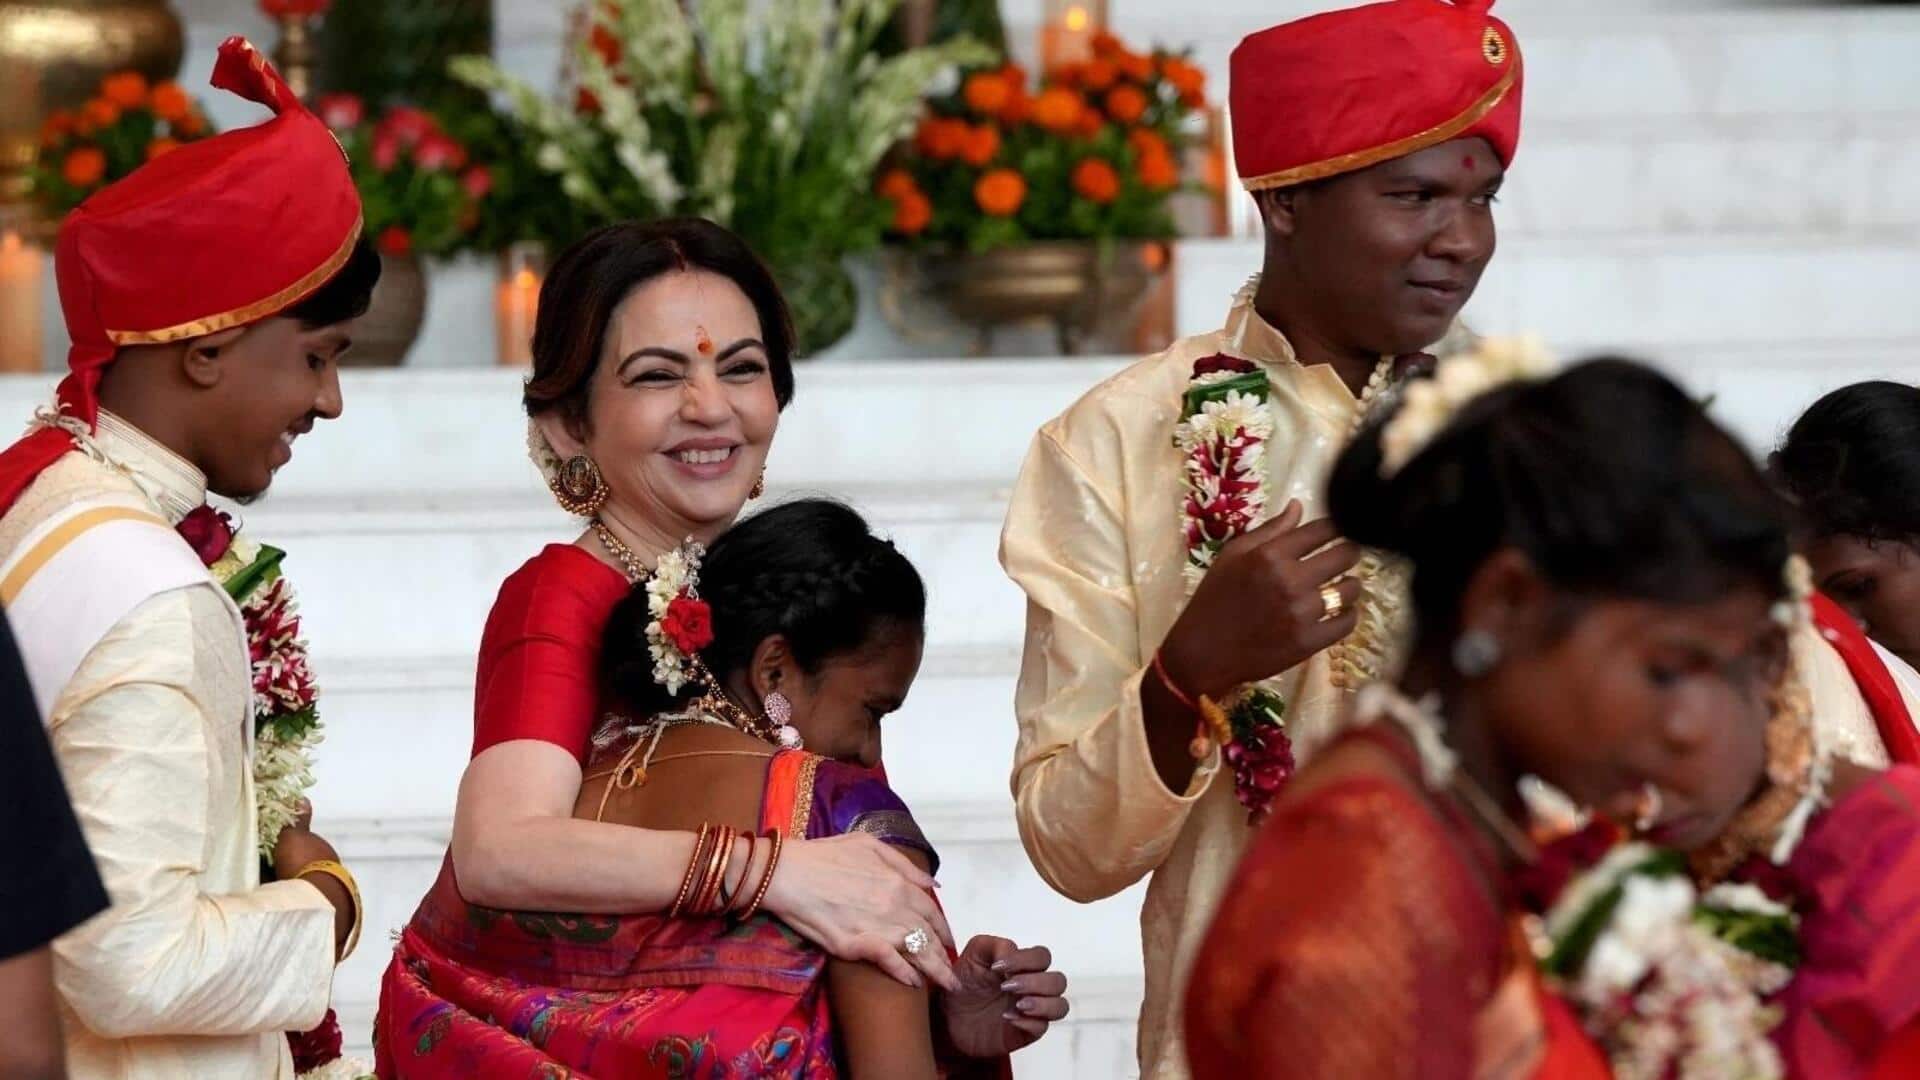 Mass wedding: Ambanis shower couples with gold, cash, household essentials